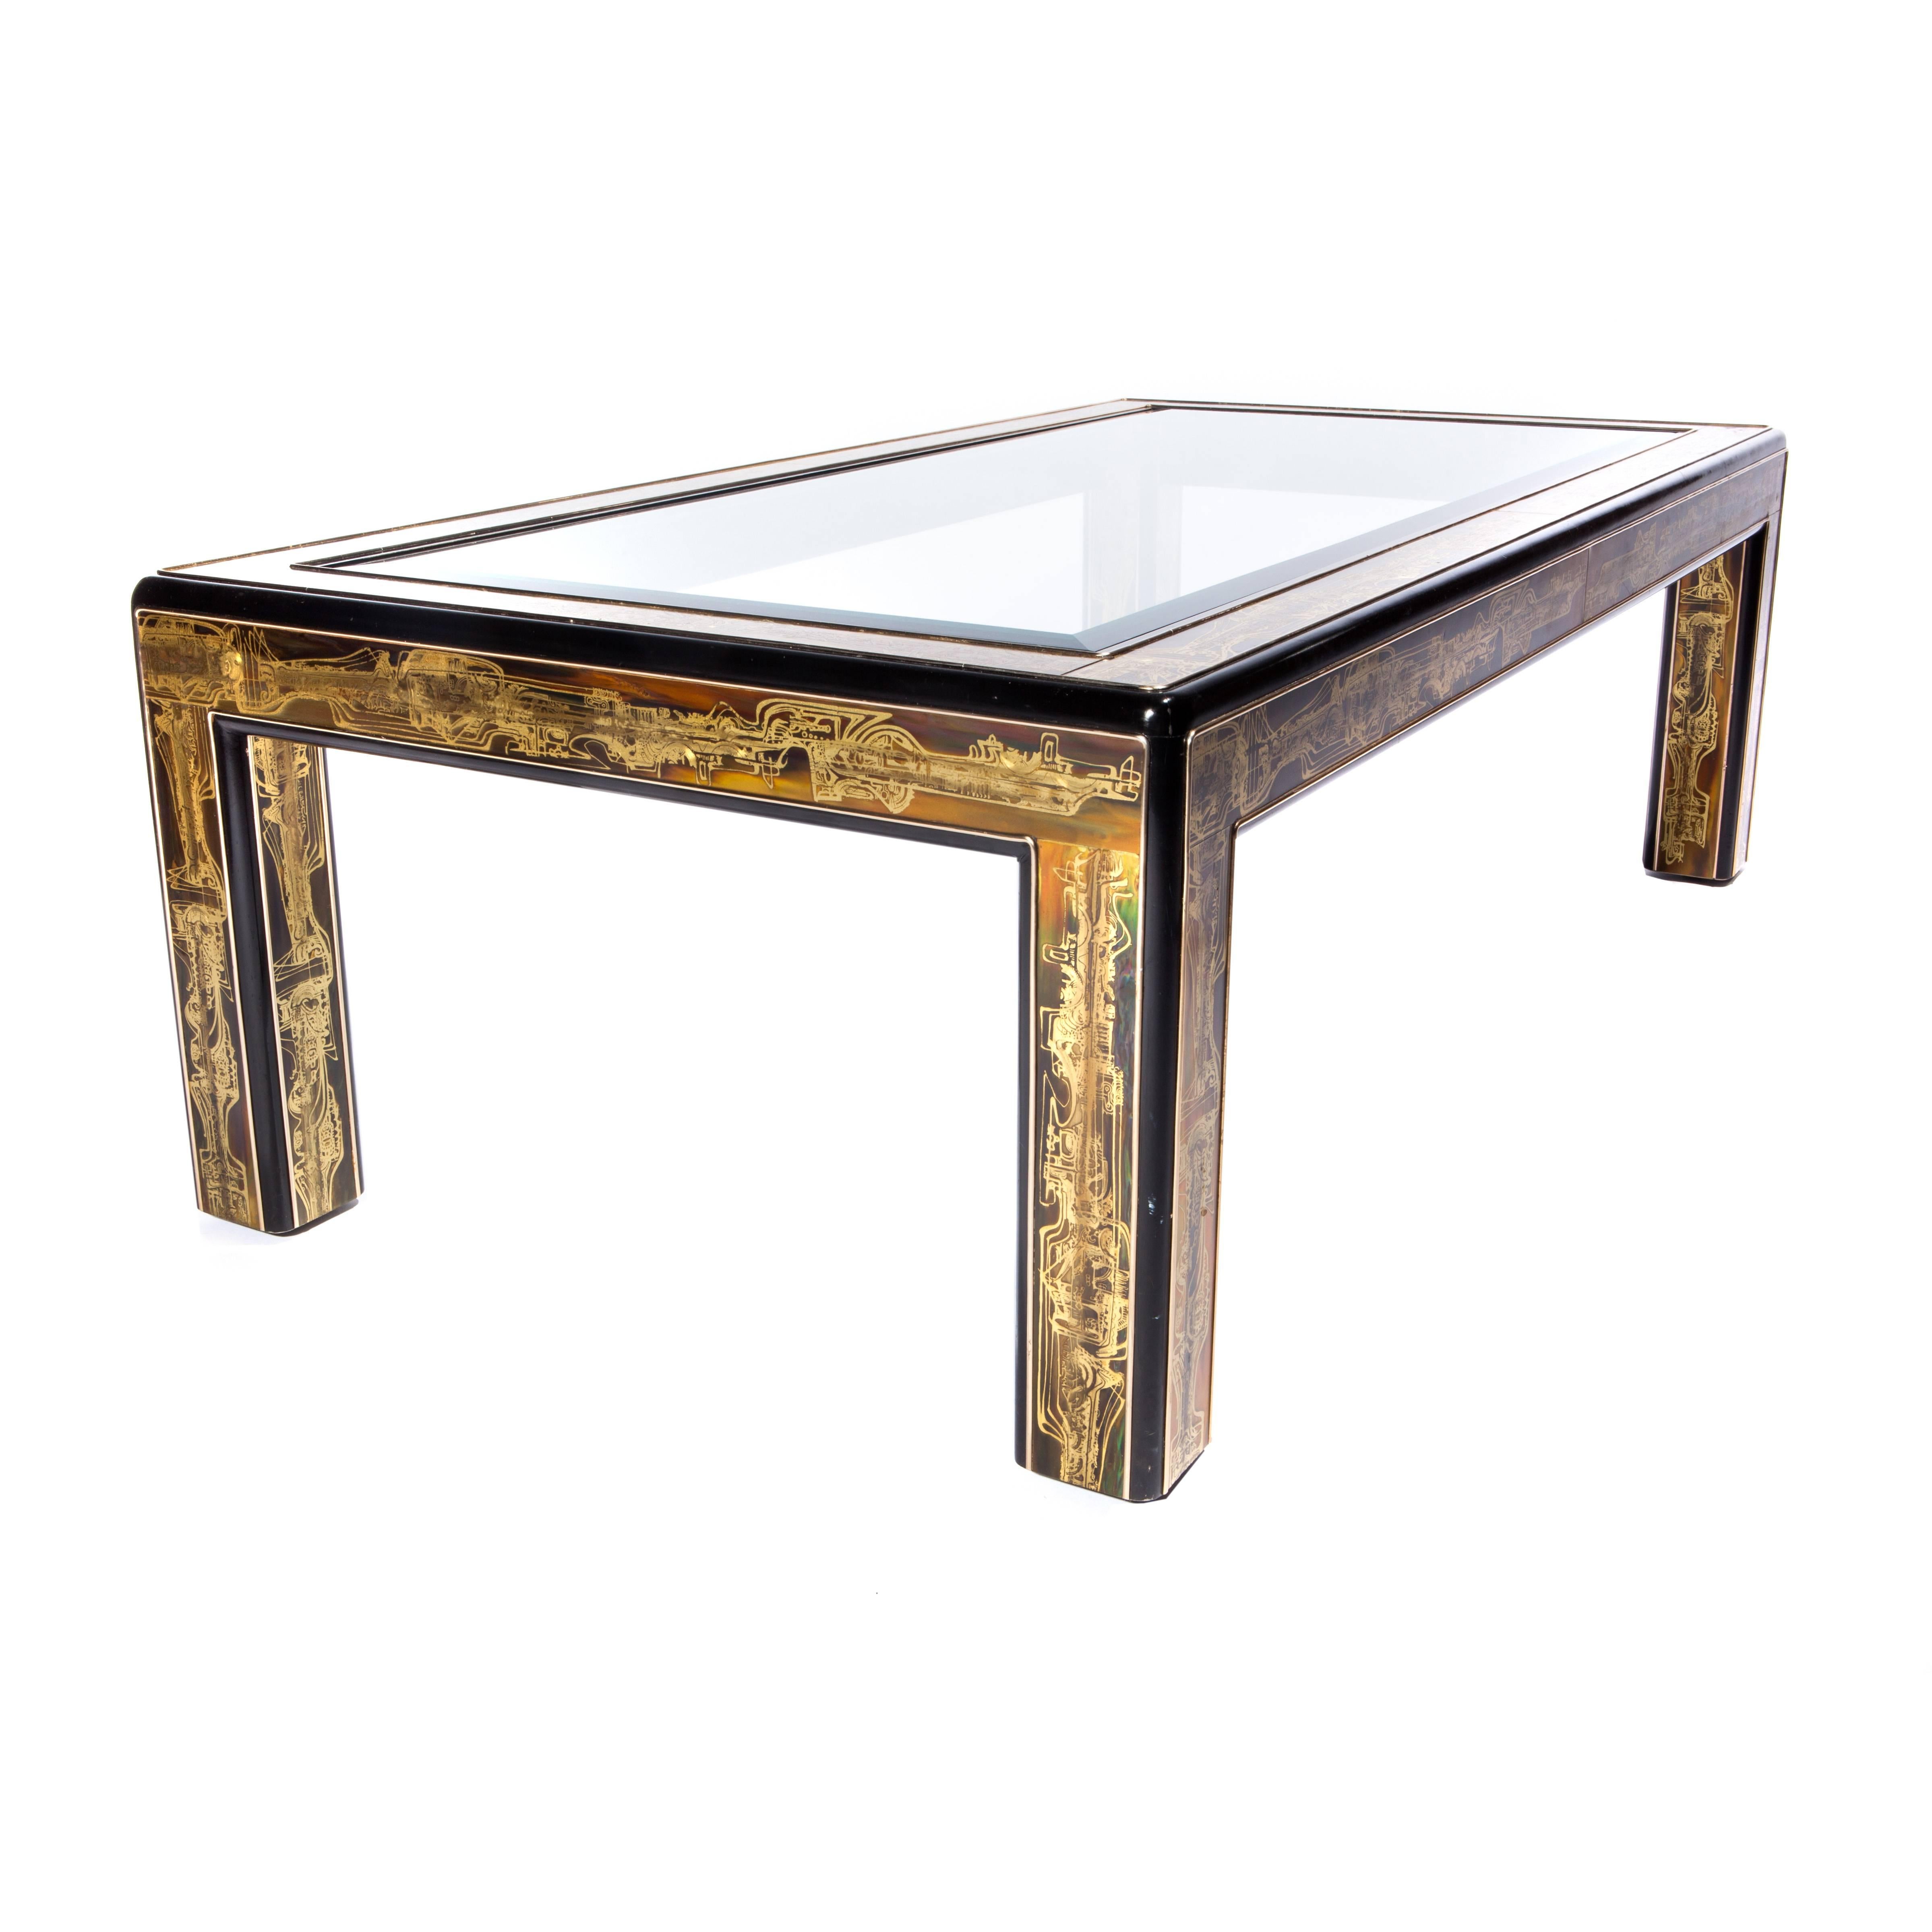 Late 20th Century Mastercraft Coffee Table in Acid-Etched Brass by Bernhard Rohne, Circa 1970s